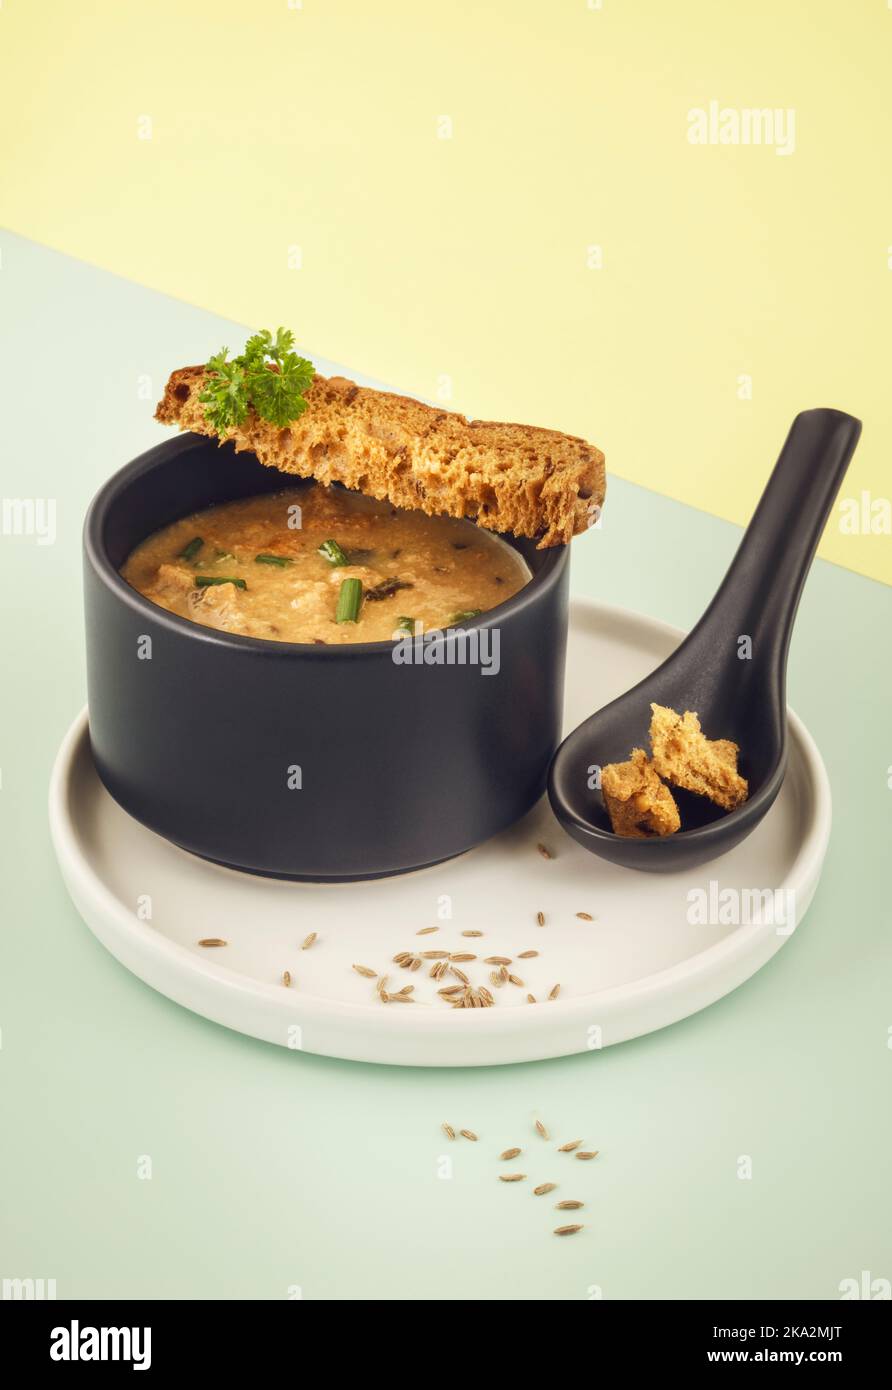 Homemade bread soup made from leftover bread and cumin seeds Stock Photo